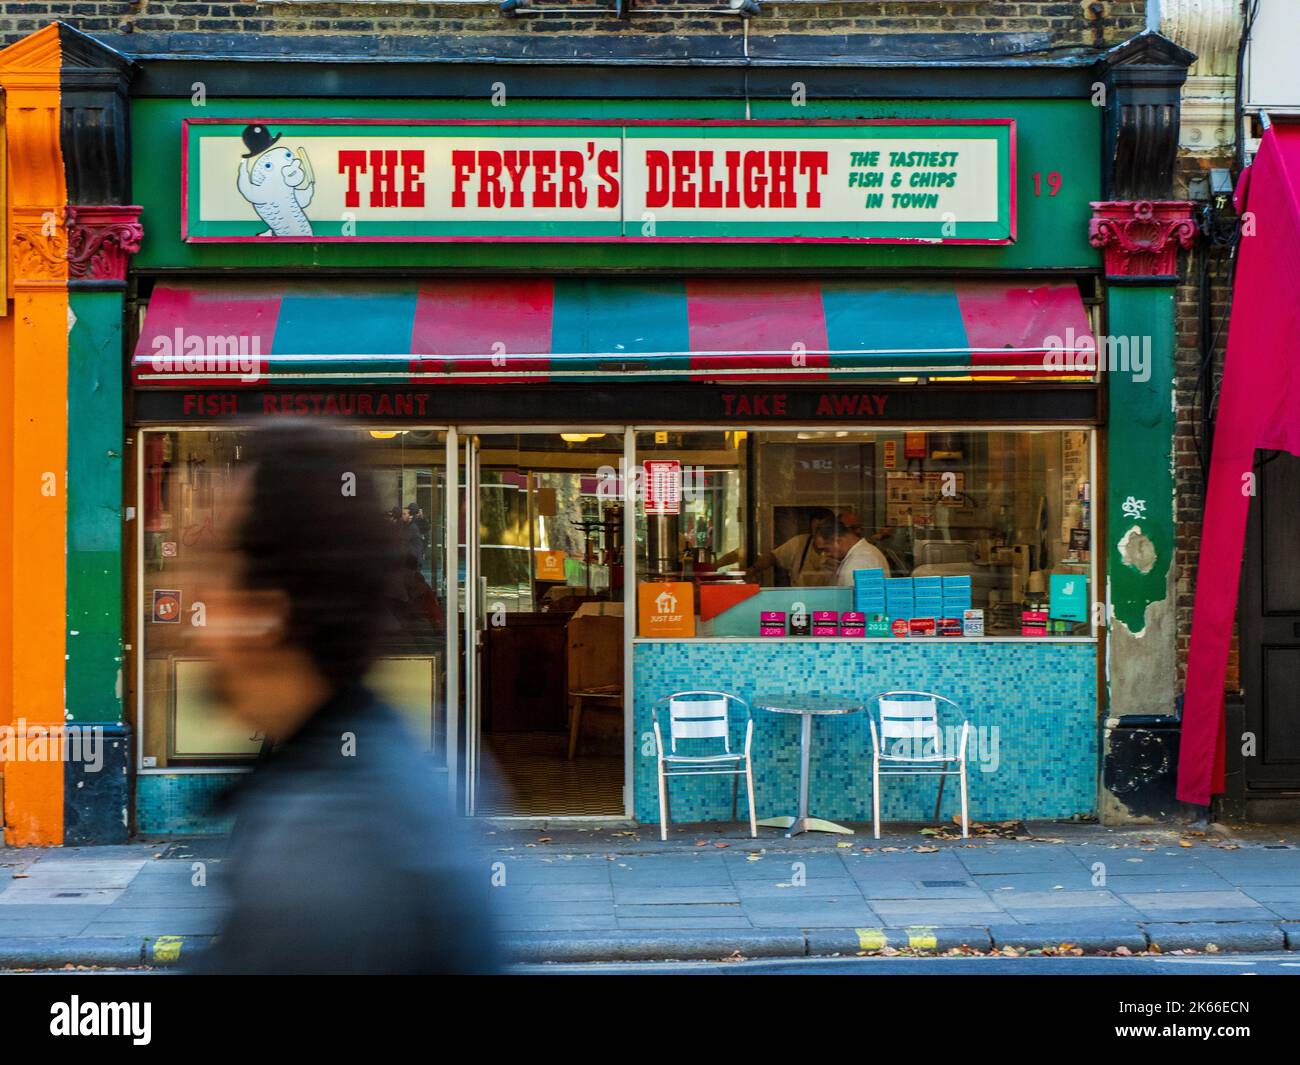 The Fryers Delight Fish and Chip Shop at 19 Theobalds Road, London. London fish and chip shop. Stock Photo